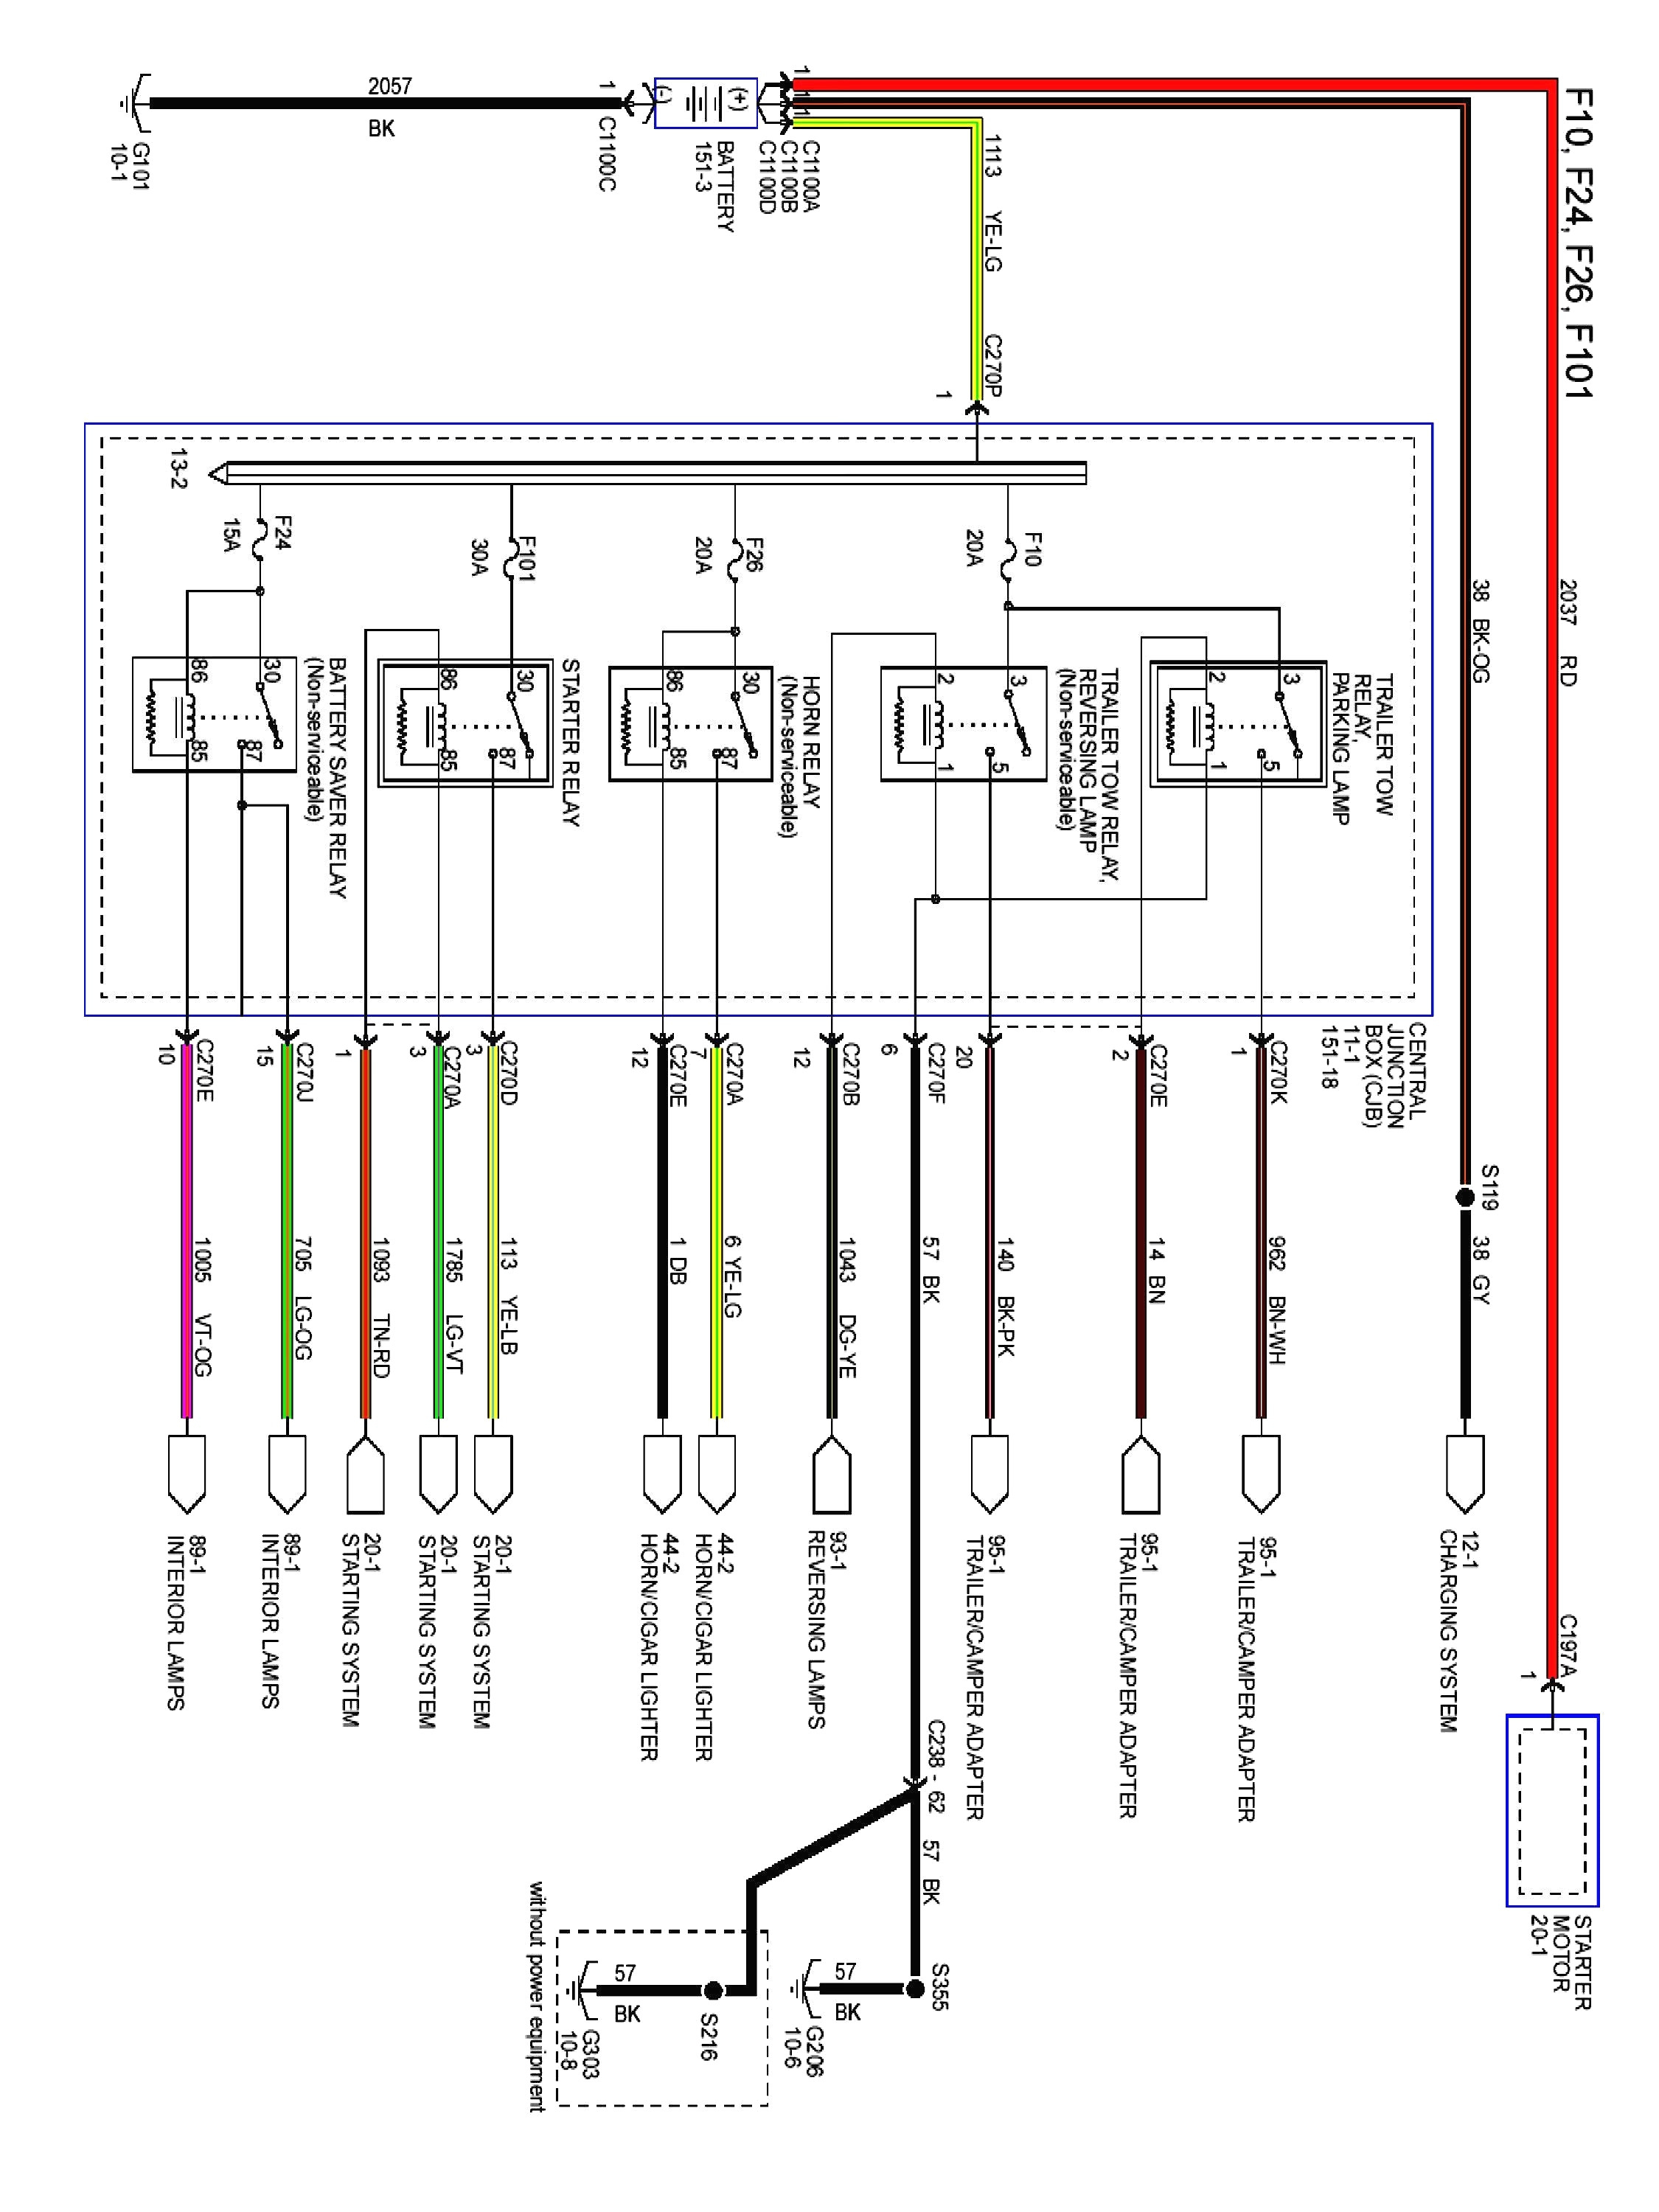 ford ignition wiring harness wiring diagram paper ford ignition coil wiring harness ford ignition wiring harness